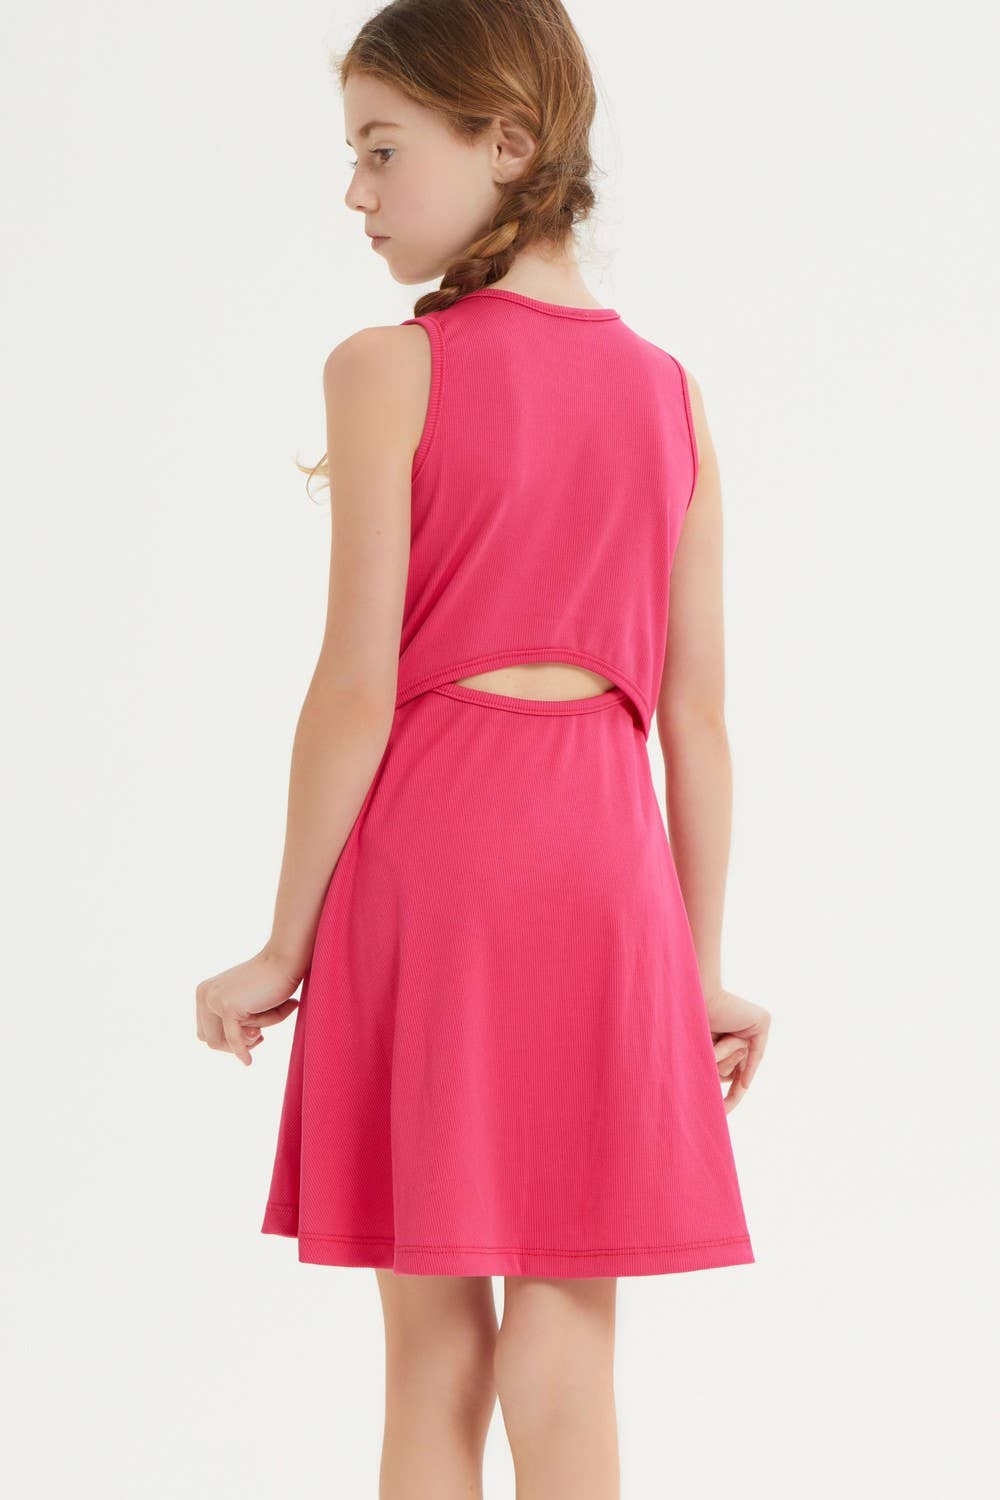 The Ruby Flare Dress in Hot Pink